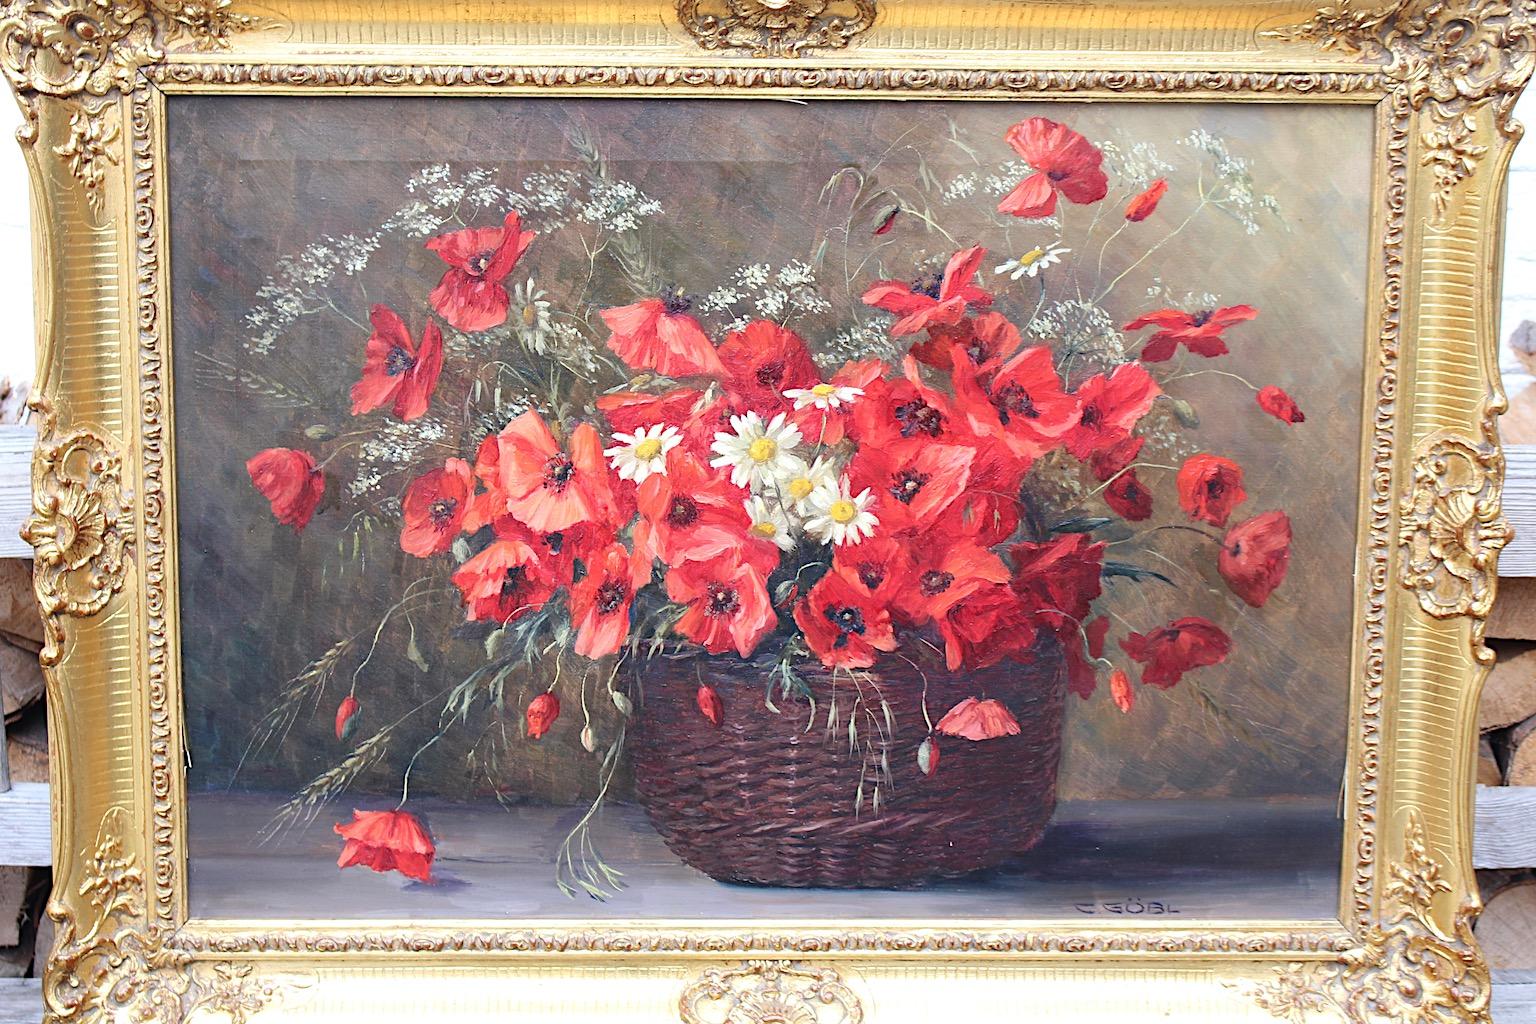 Art Deco oil on canvas painting red poppy bouquet with camomille in a wicker basket by Camilla Göbl 1940s Austria.
Camilla Göbl or Camilla Göbl-Wahl ( 1871 - 1965 ) 
Camilla Göbl female still - life painter
She studied with very important painter